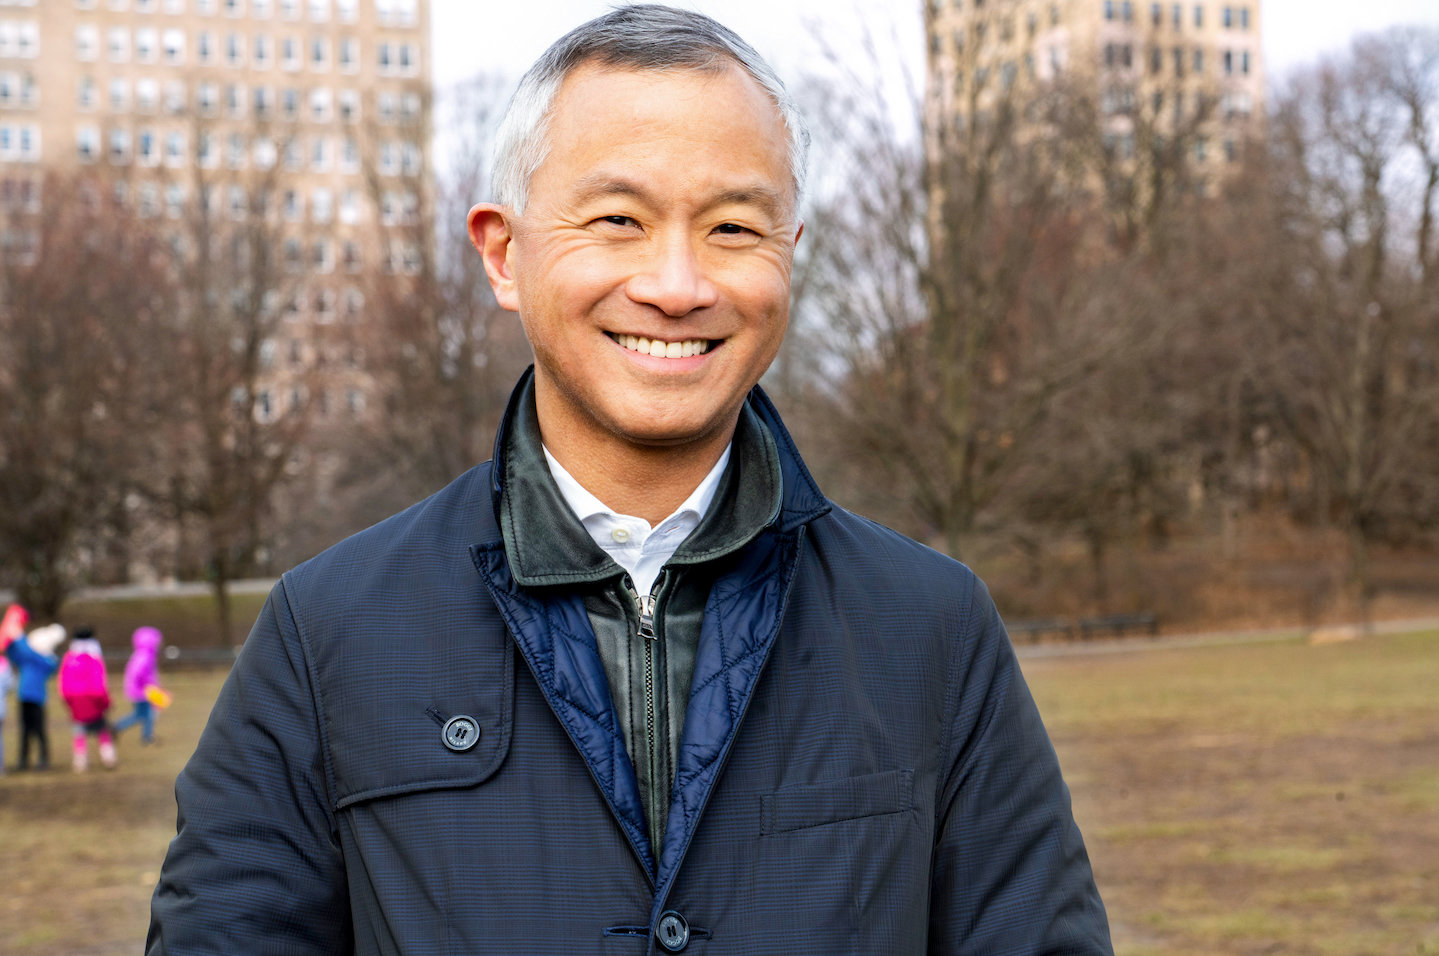 Art Chang says his years in city and state government — as well as local non-profits and technology companies — make him the best choice for the city’s next mayor. Chang is running for the position in a June 22 Democratic primary against bigger-name candidates like entrepreneur Andrew Yang and Brooklyn borough president Eric Adams.